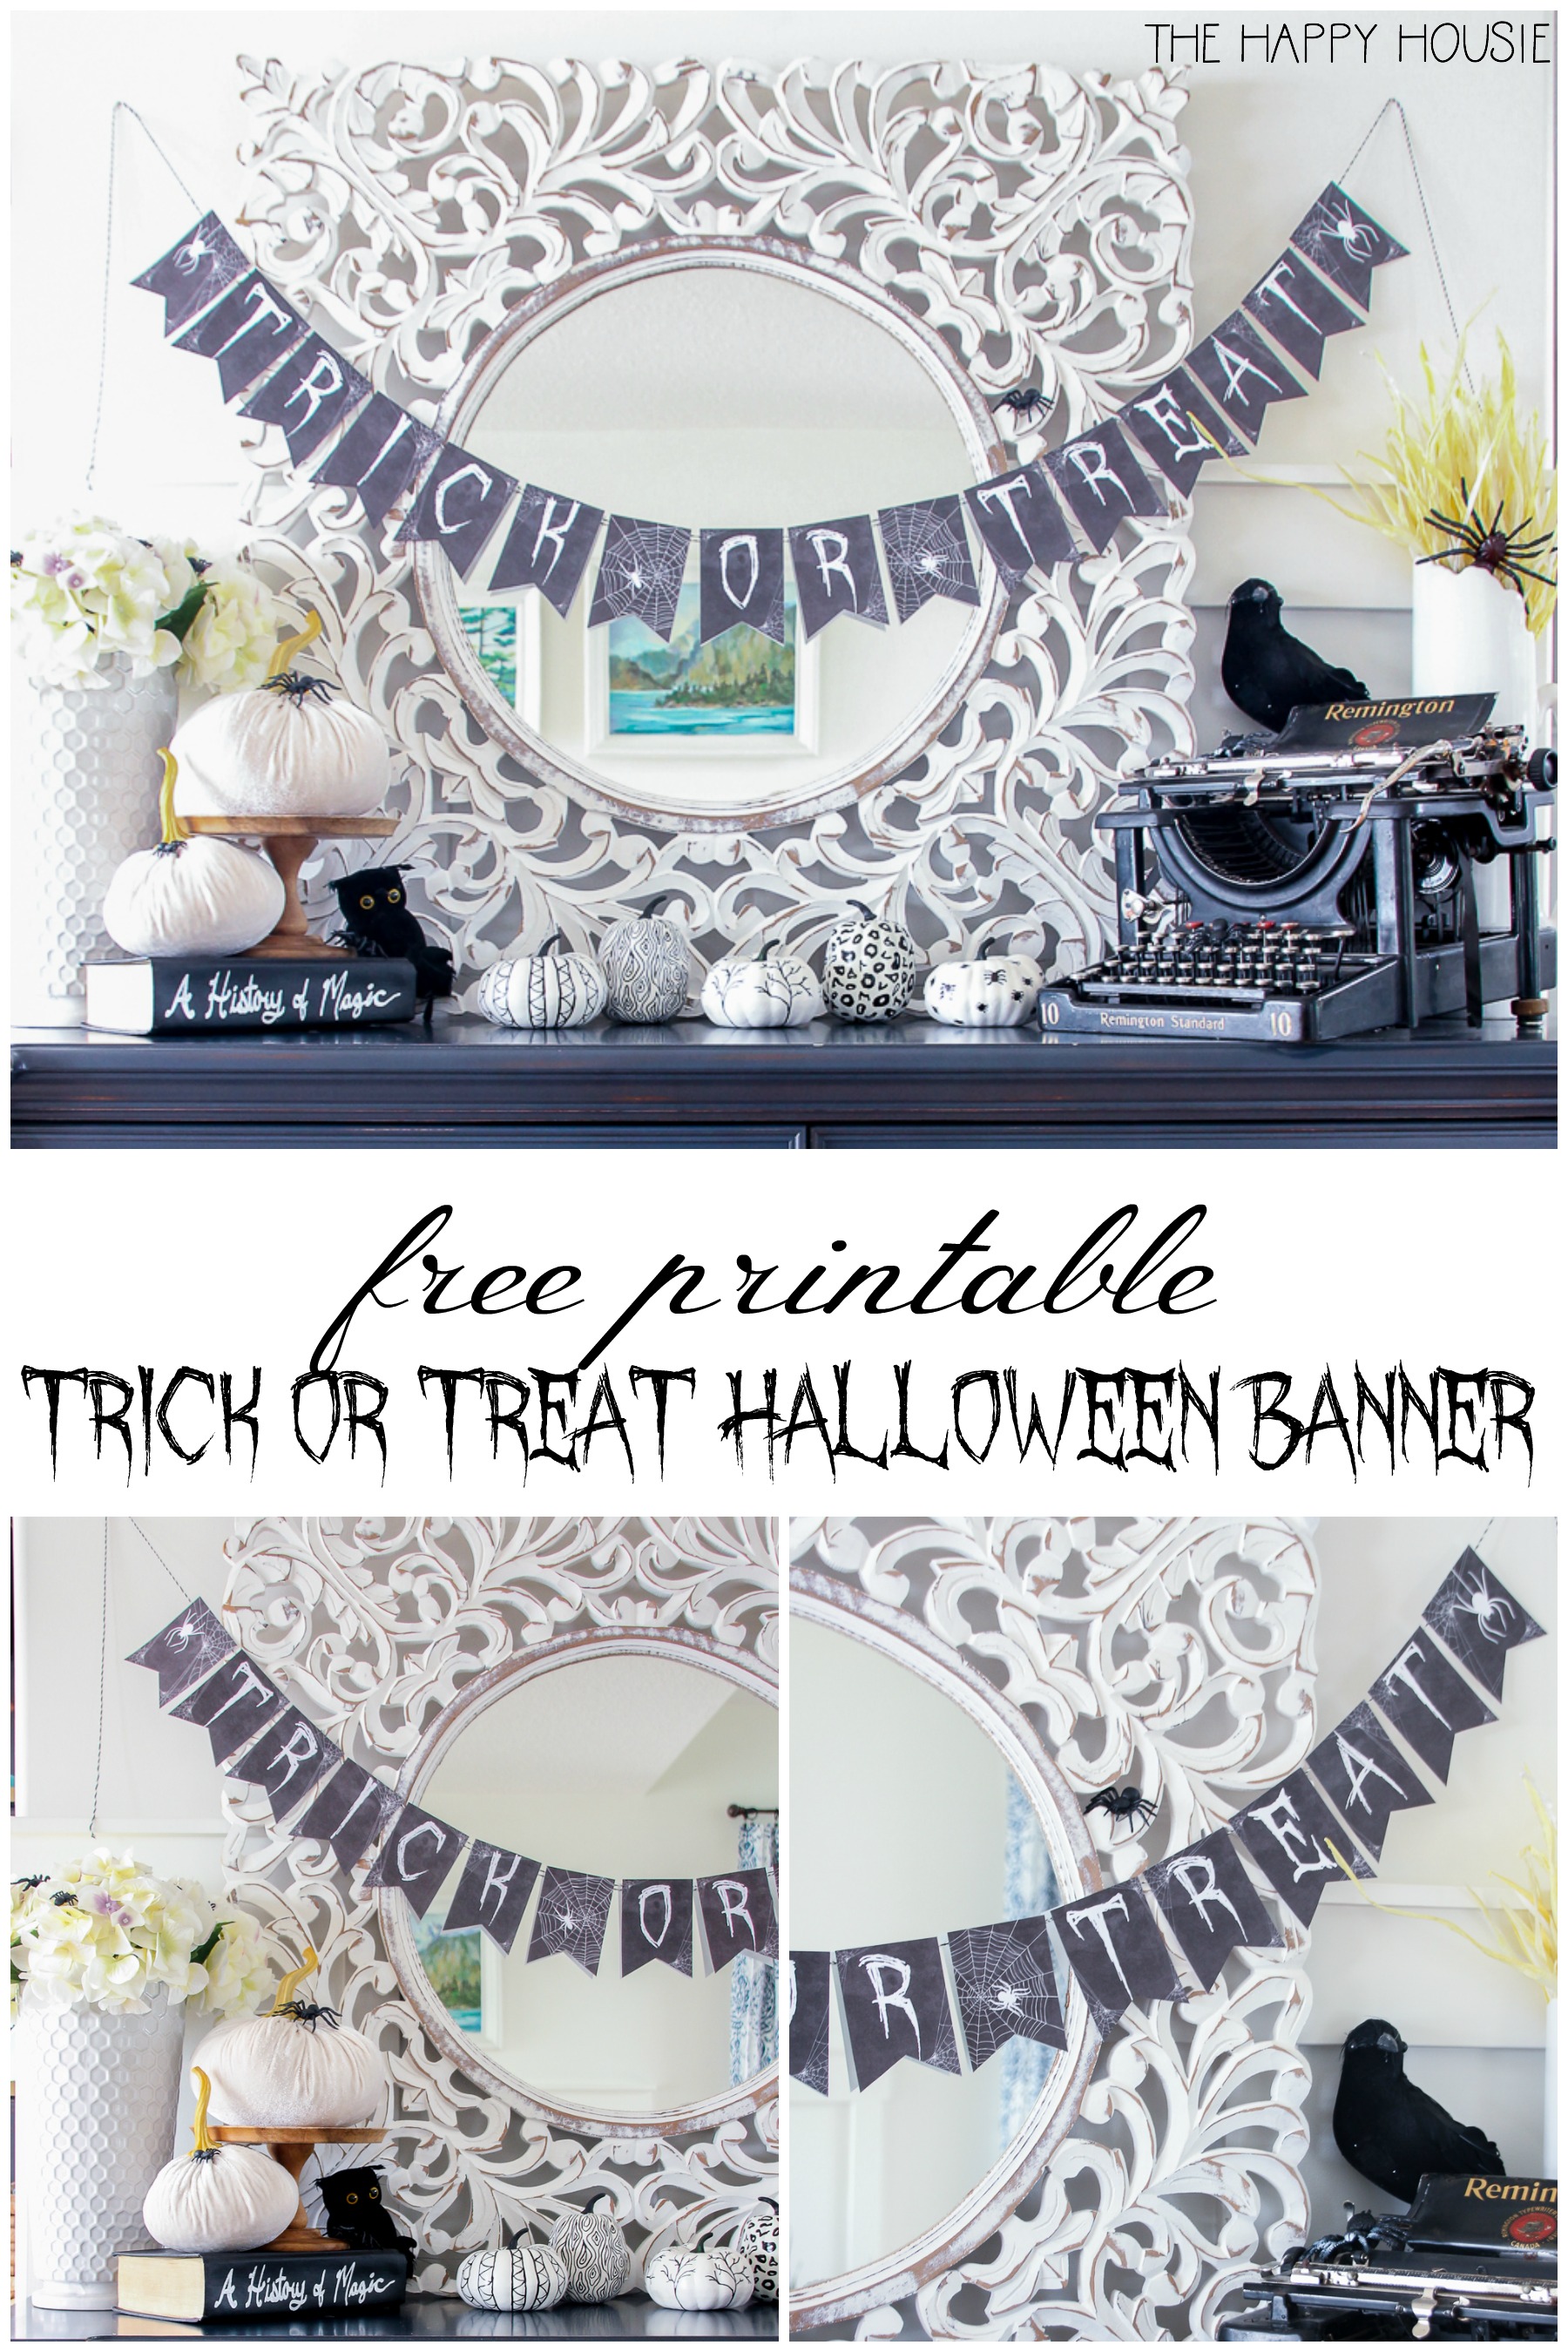 Free Printable Trick Or Treat Halloween Banner poster.